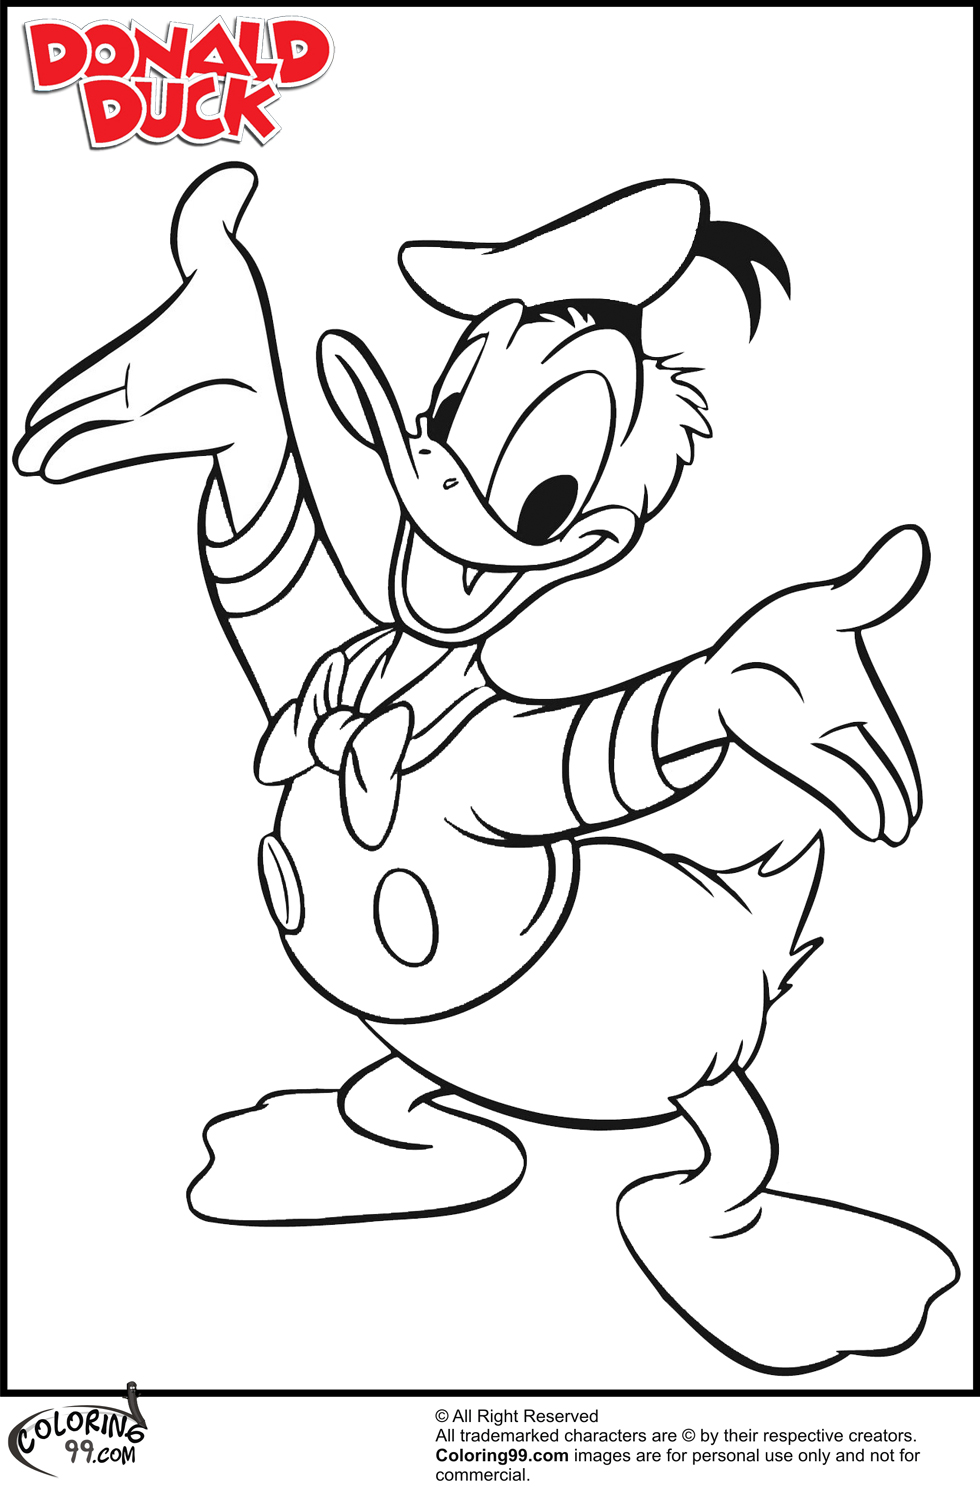 Download Donald Duck Coloring Pages | Team colors